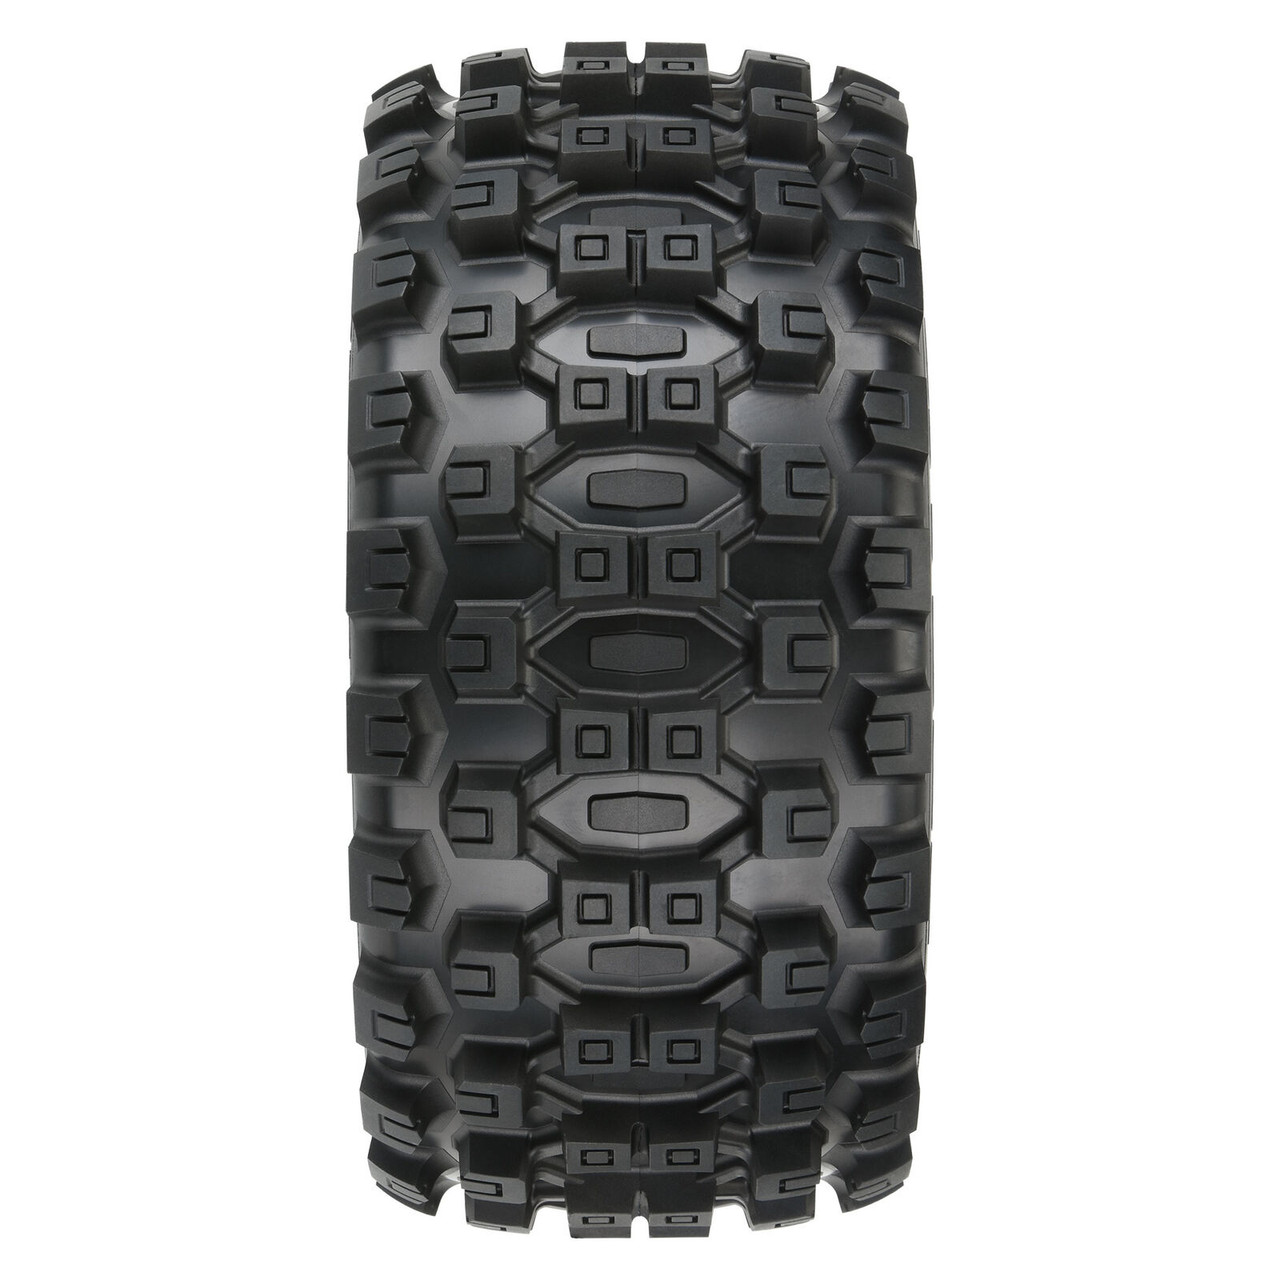 Proline 10198-11 Badlands MX57 Front/Rear 5.7” Tires Mounted on Raid 8x48 Removable 24mm Hex Wheels (2): Black